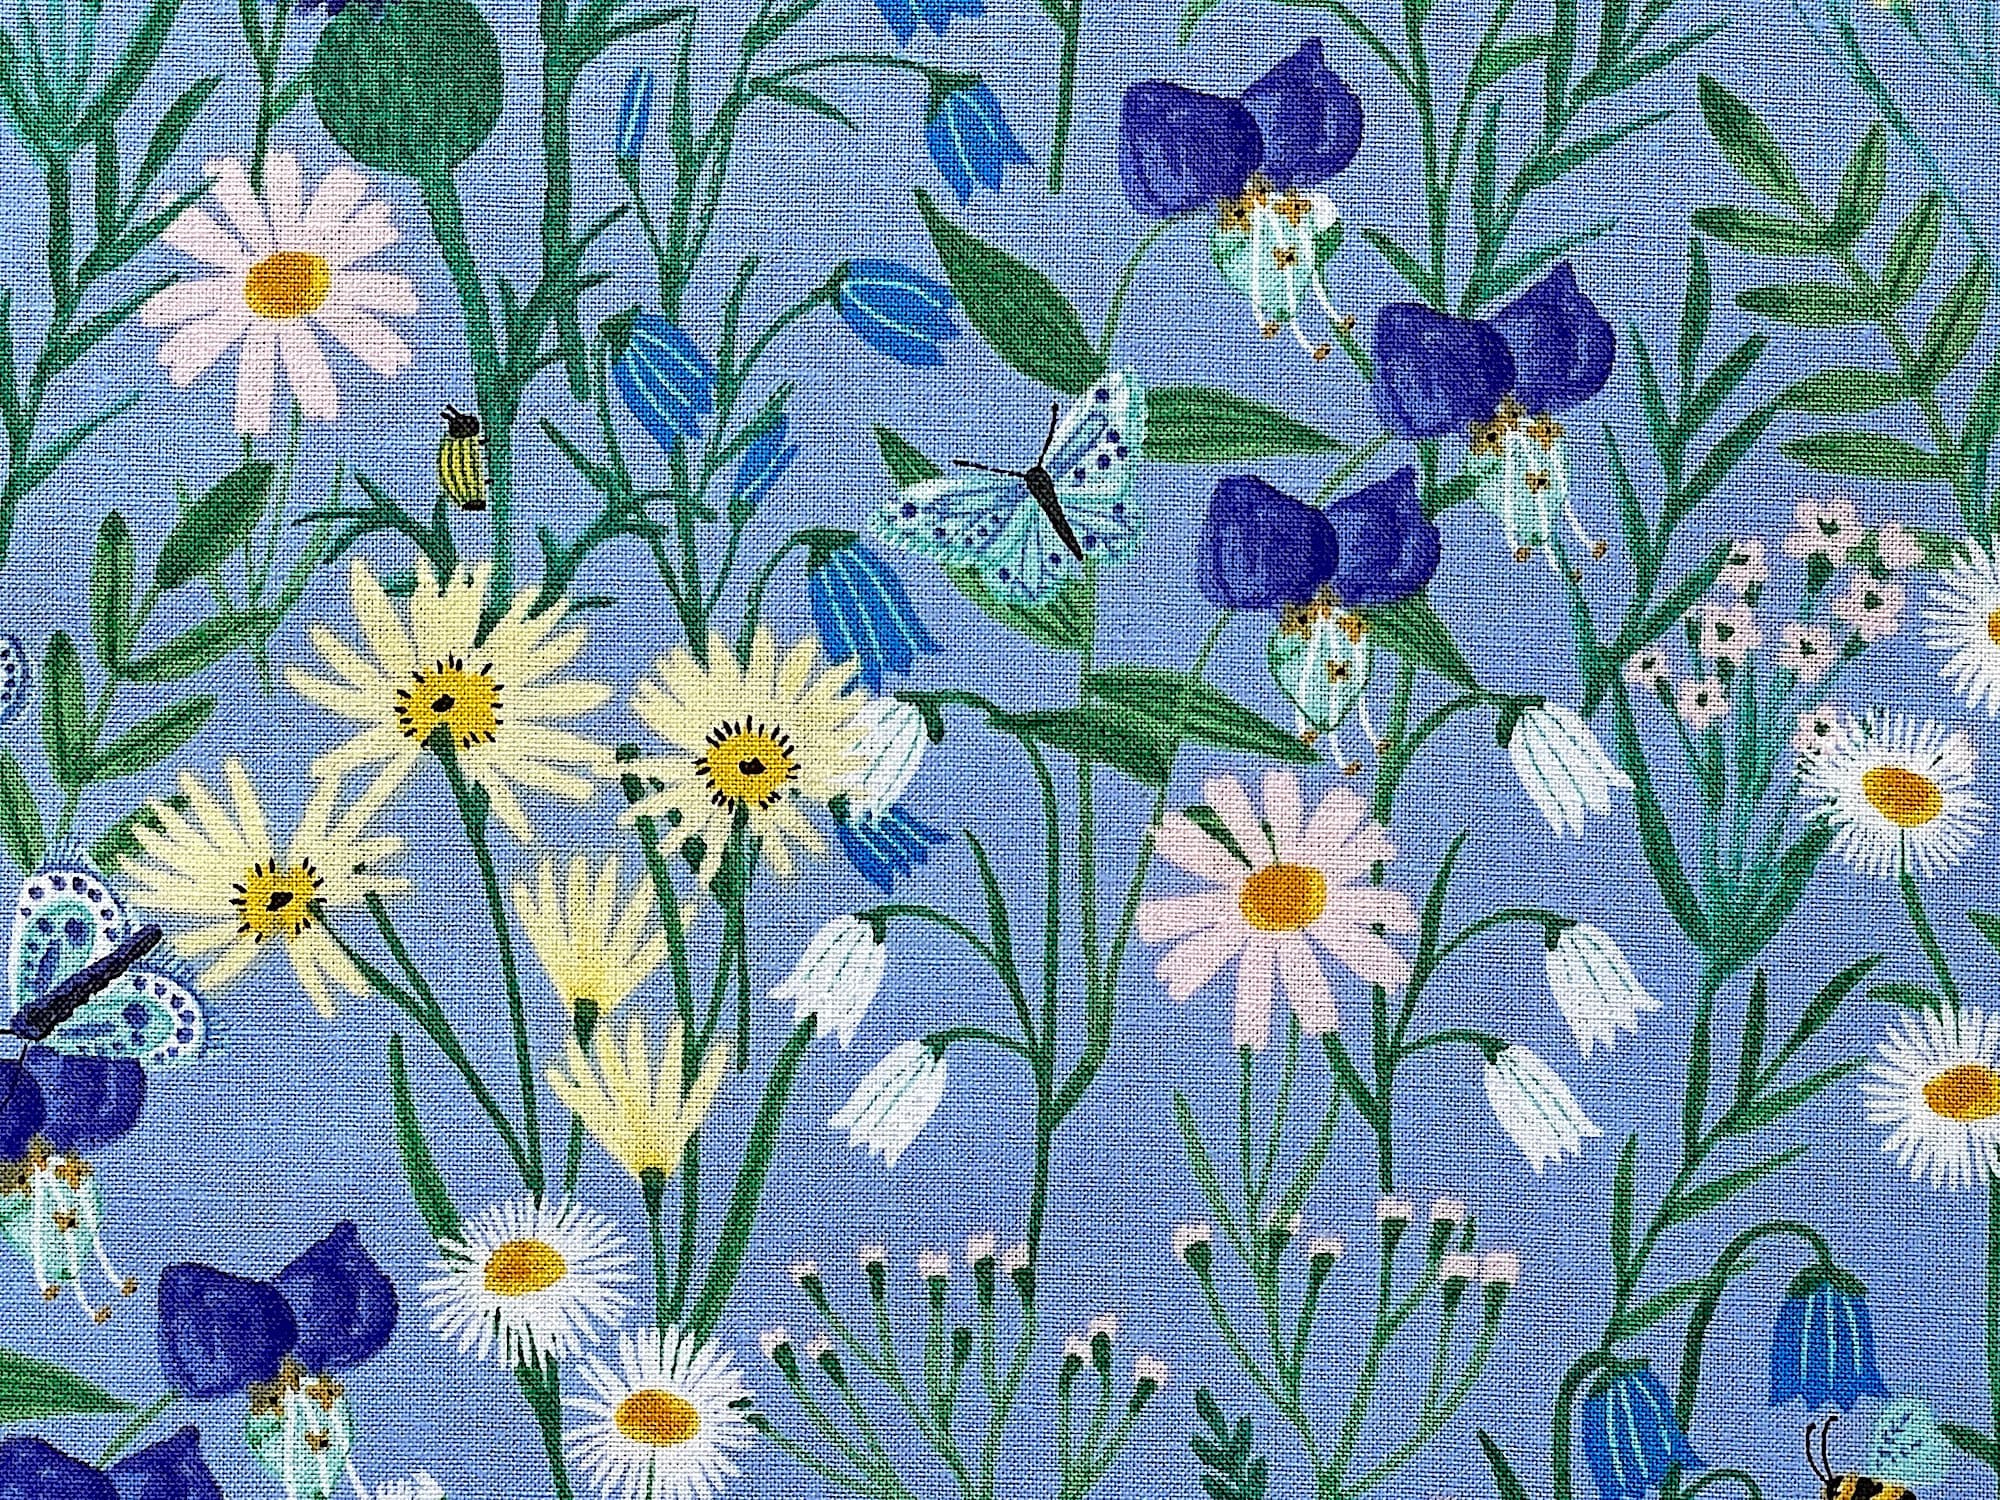 Close up of wildflowers, butterflies and bees.